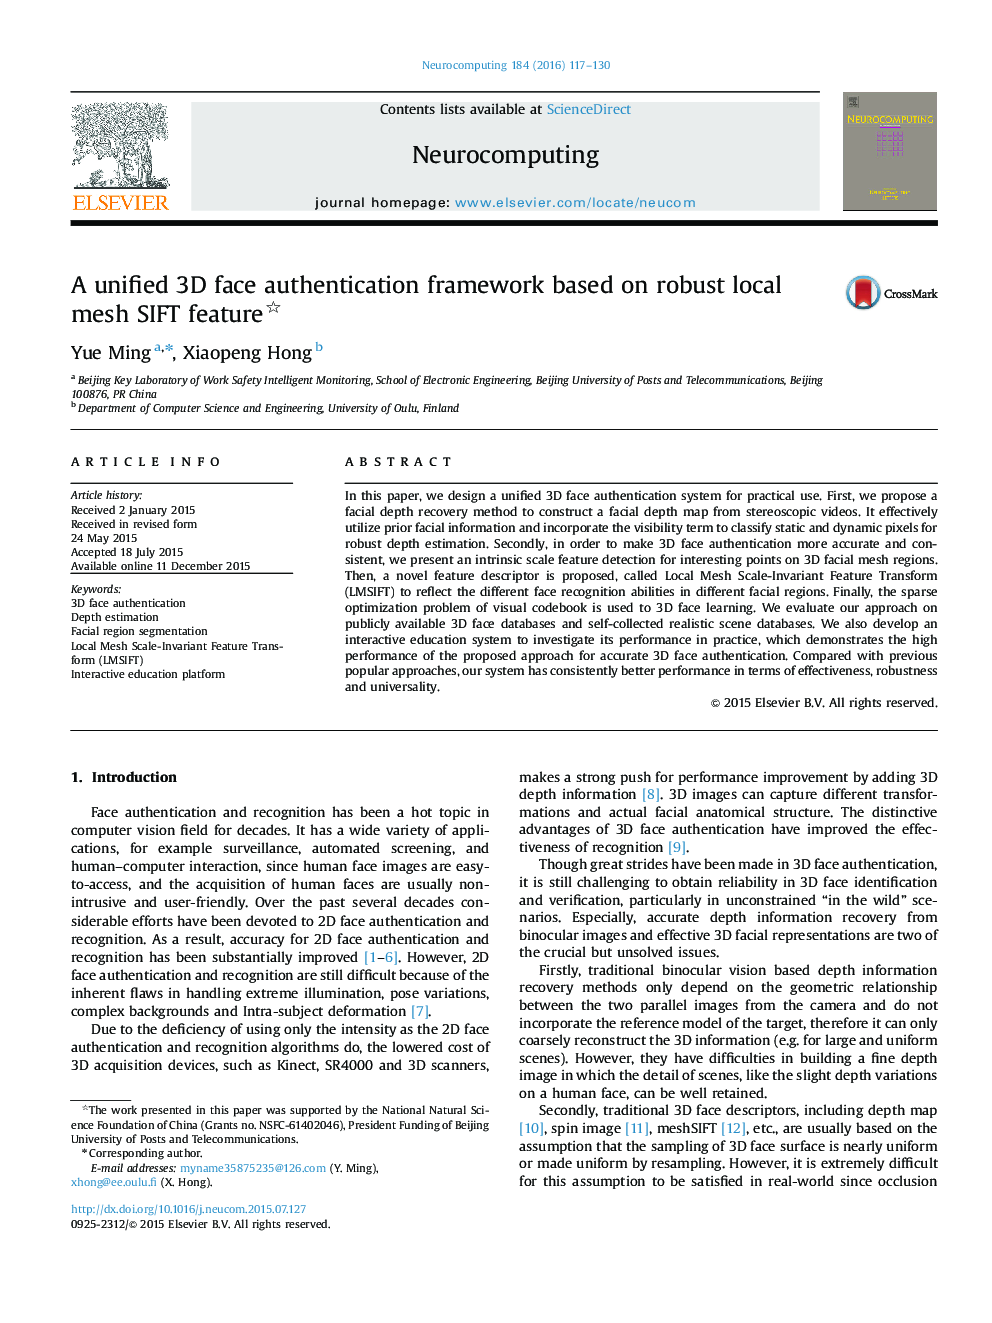 A unified 3D face authentication framework based on robust local mesh SIFT feature 